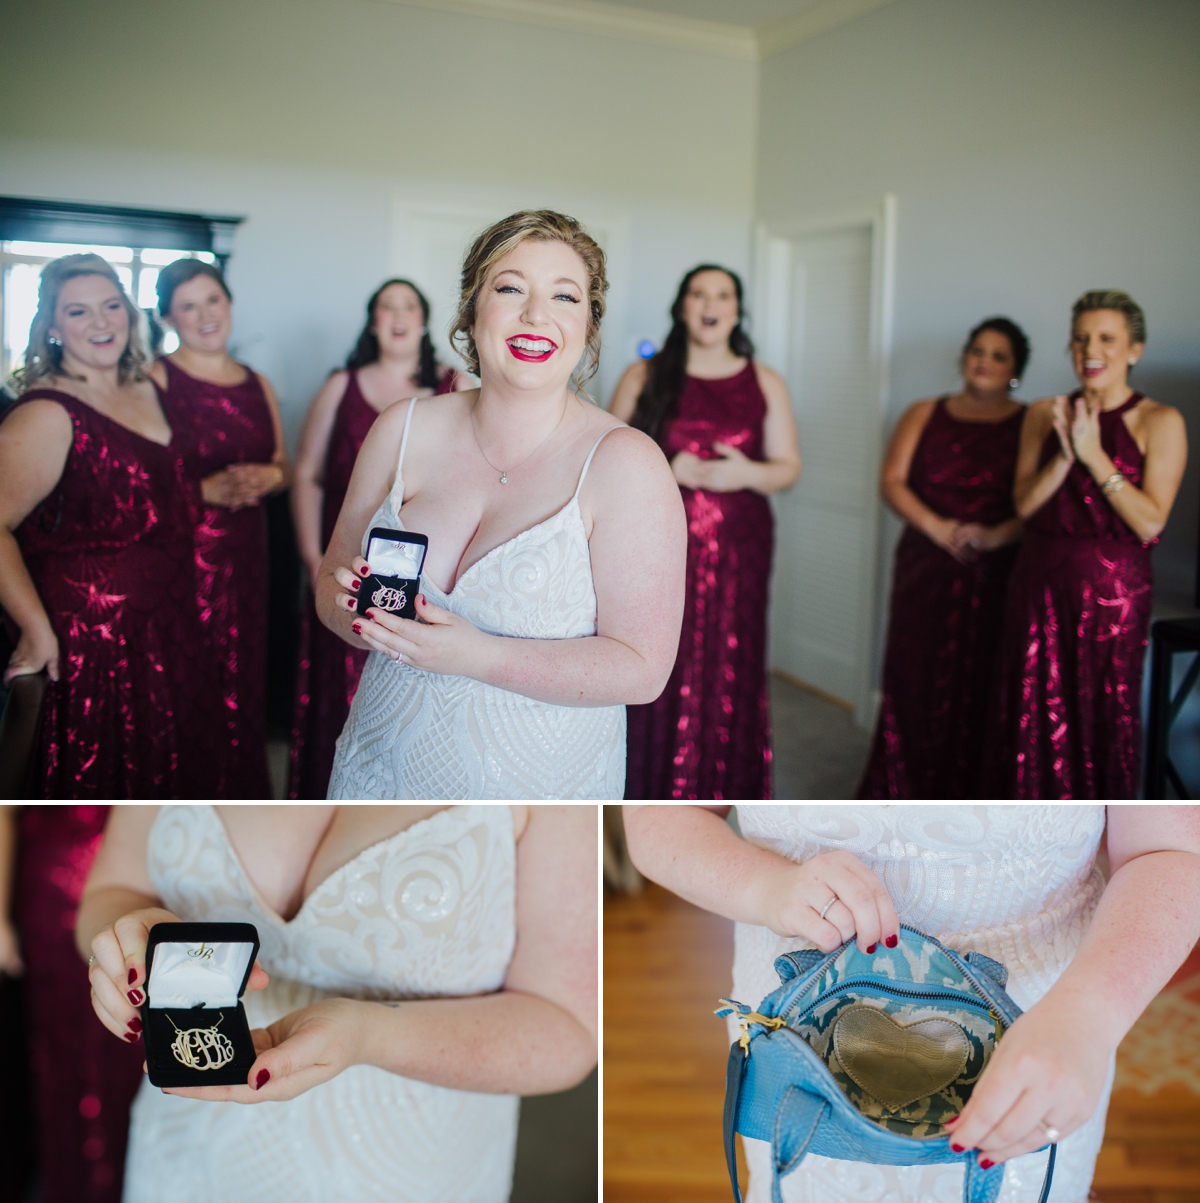 Bridesmaids in burgundy sequin gowns - Izzy Hudgins Photography